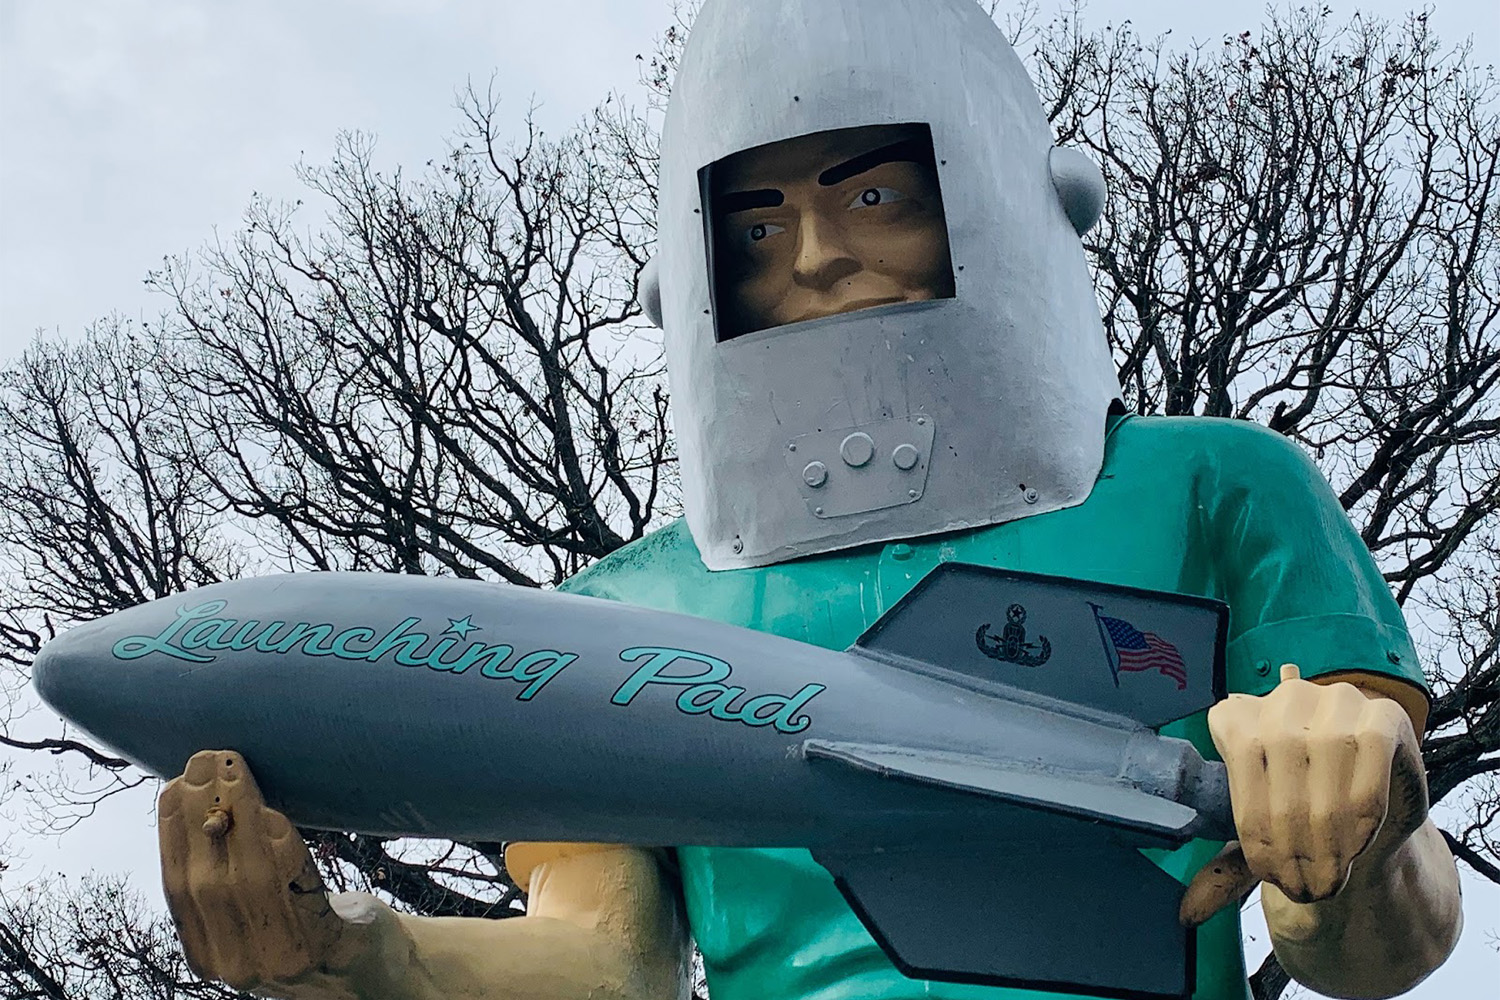 The Gemini Giant at the Launching Pad, Wilmington, IL on Route 66